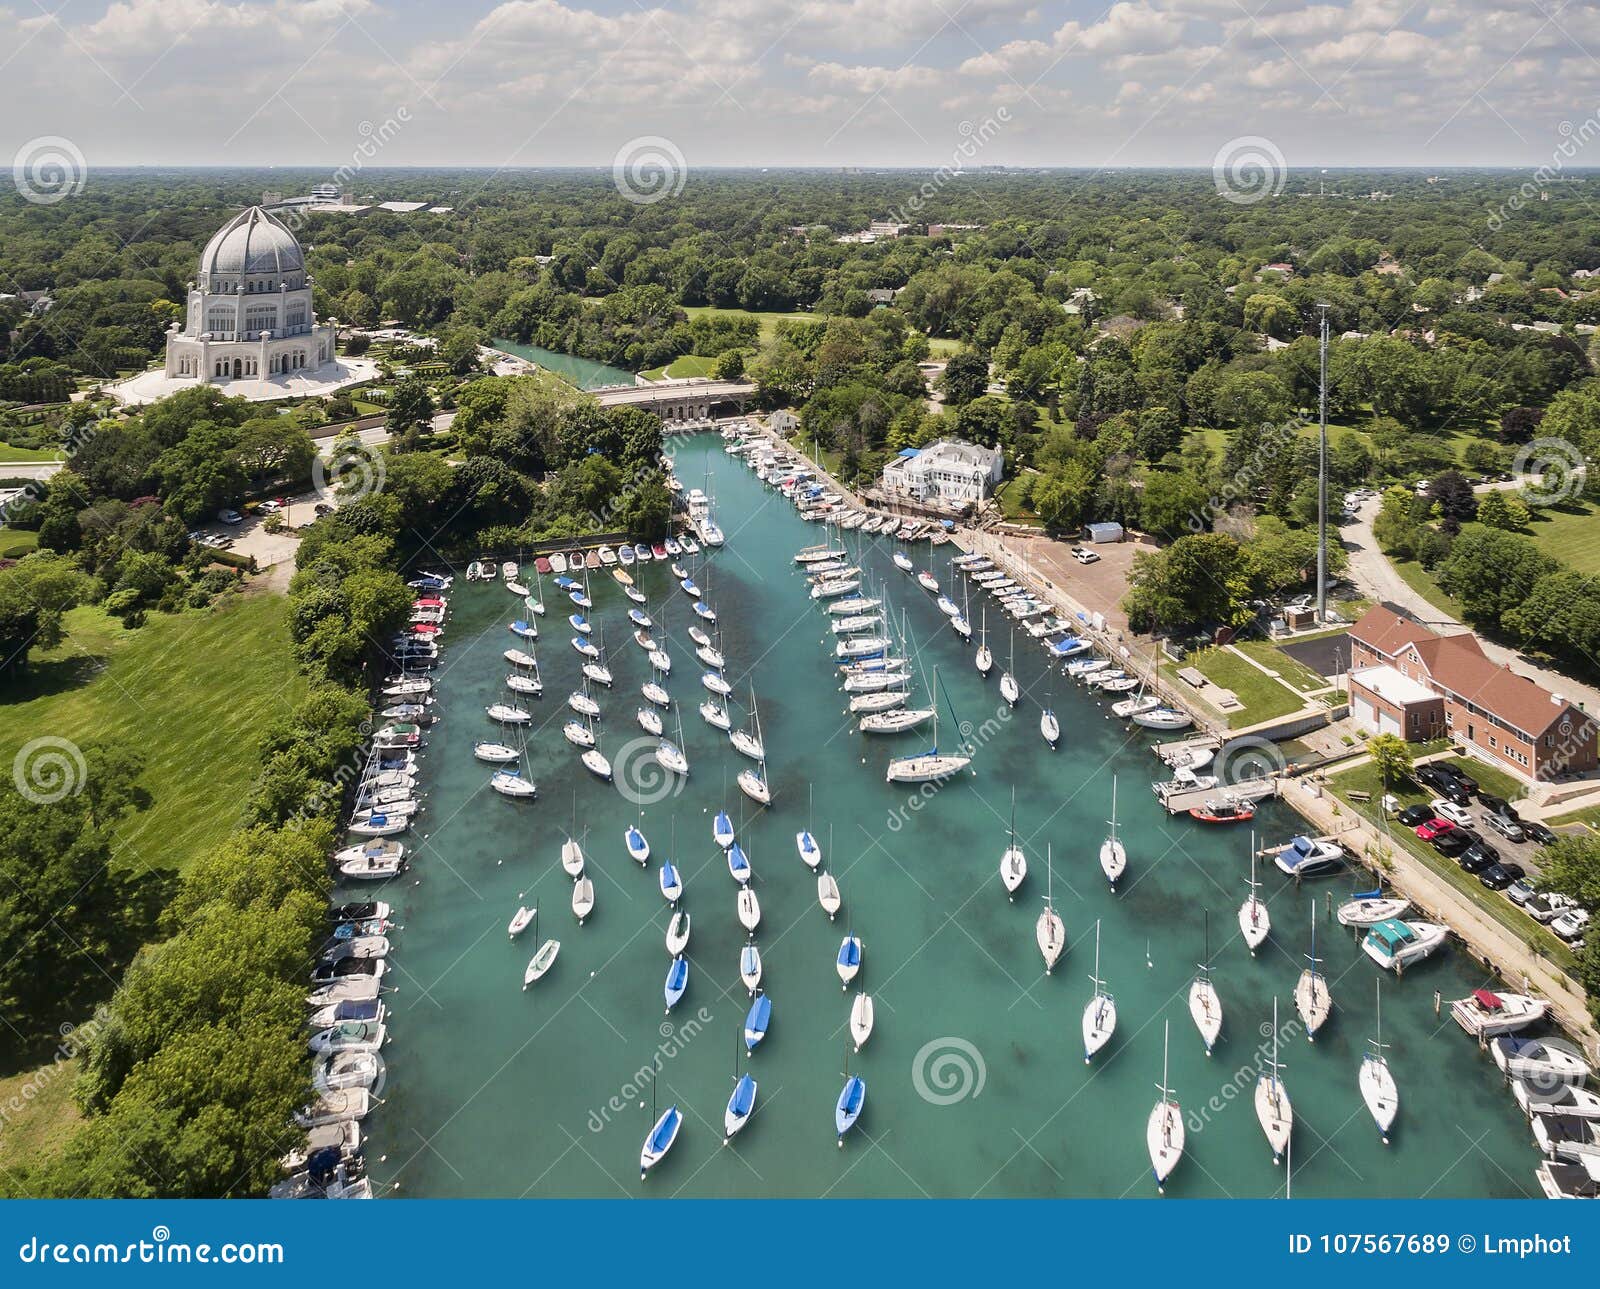 wilmette harbor aerial with baha`i temple